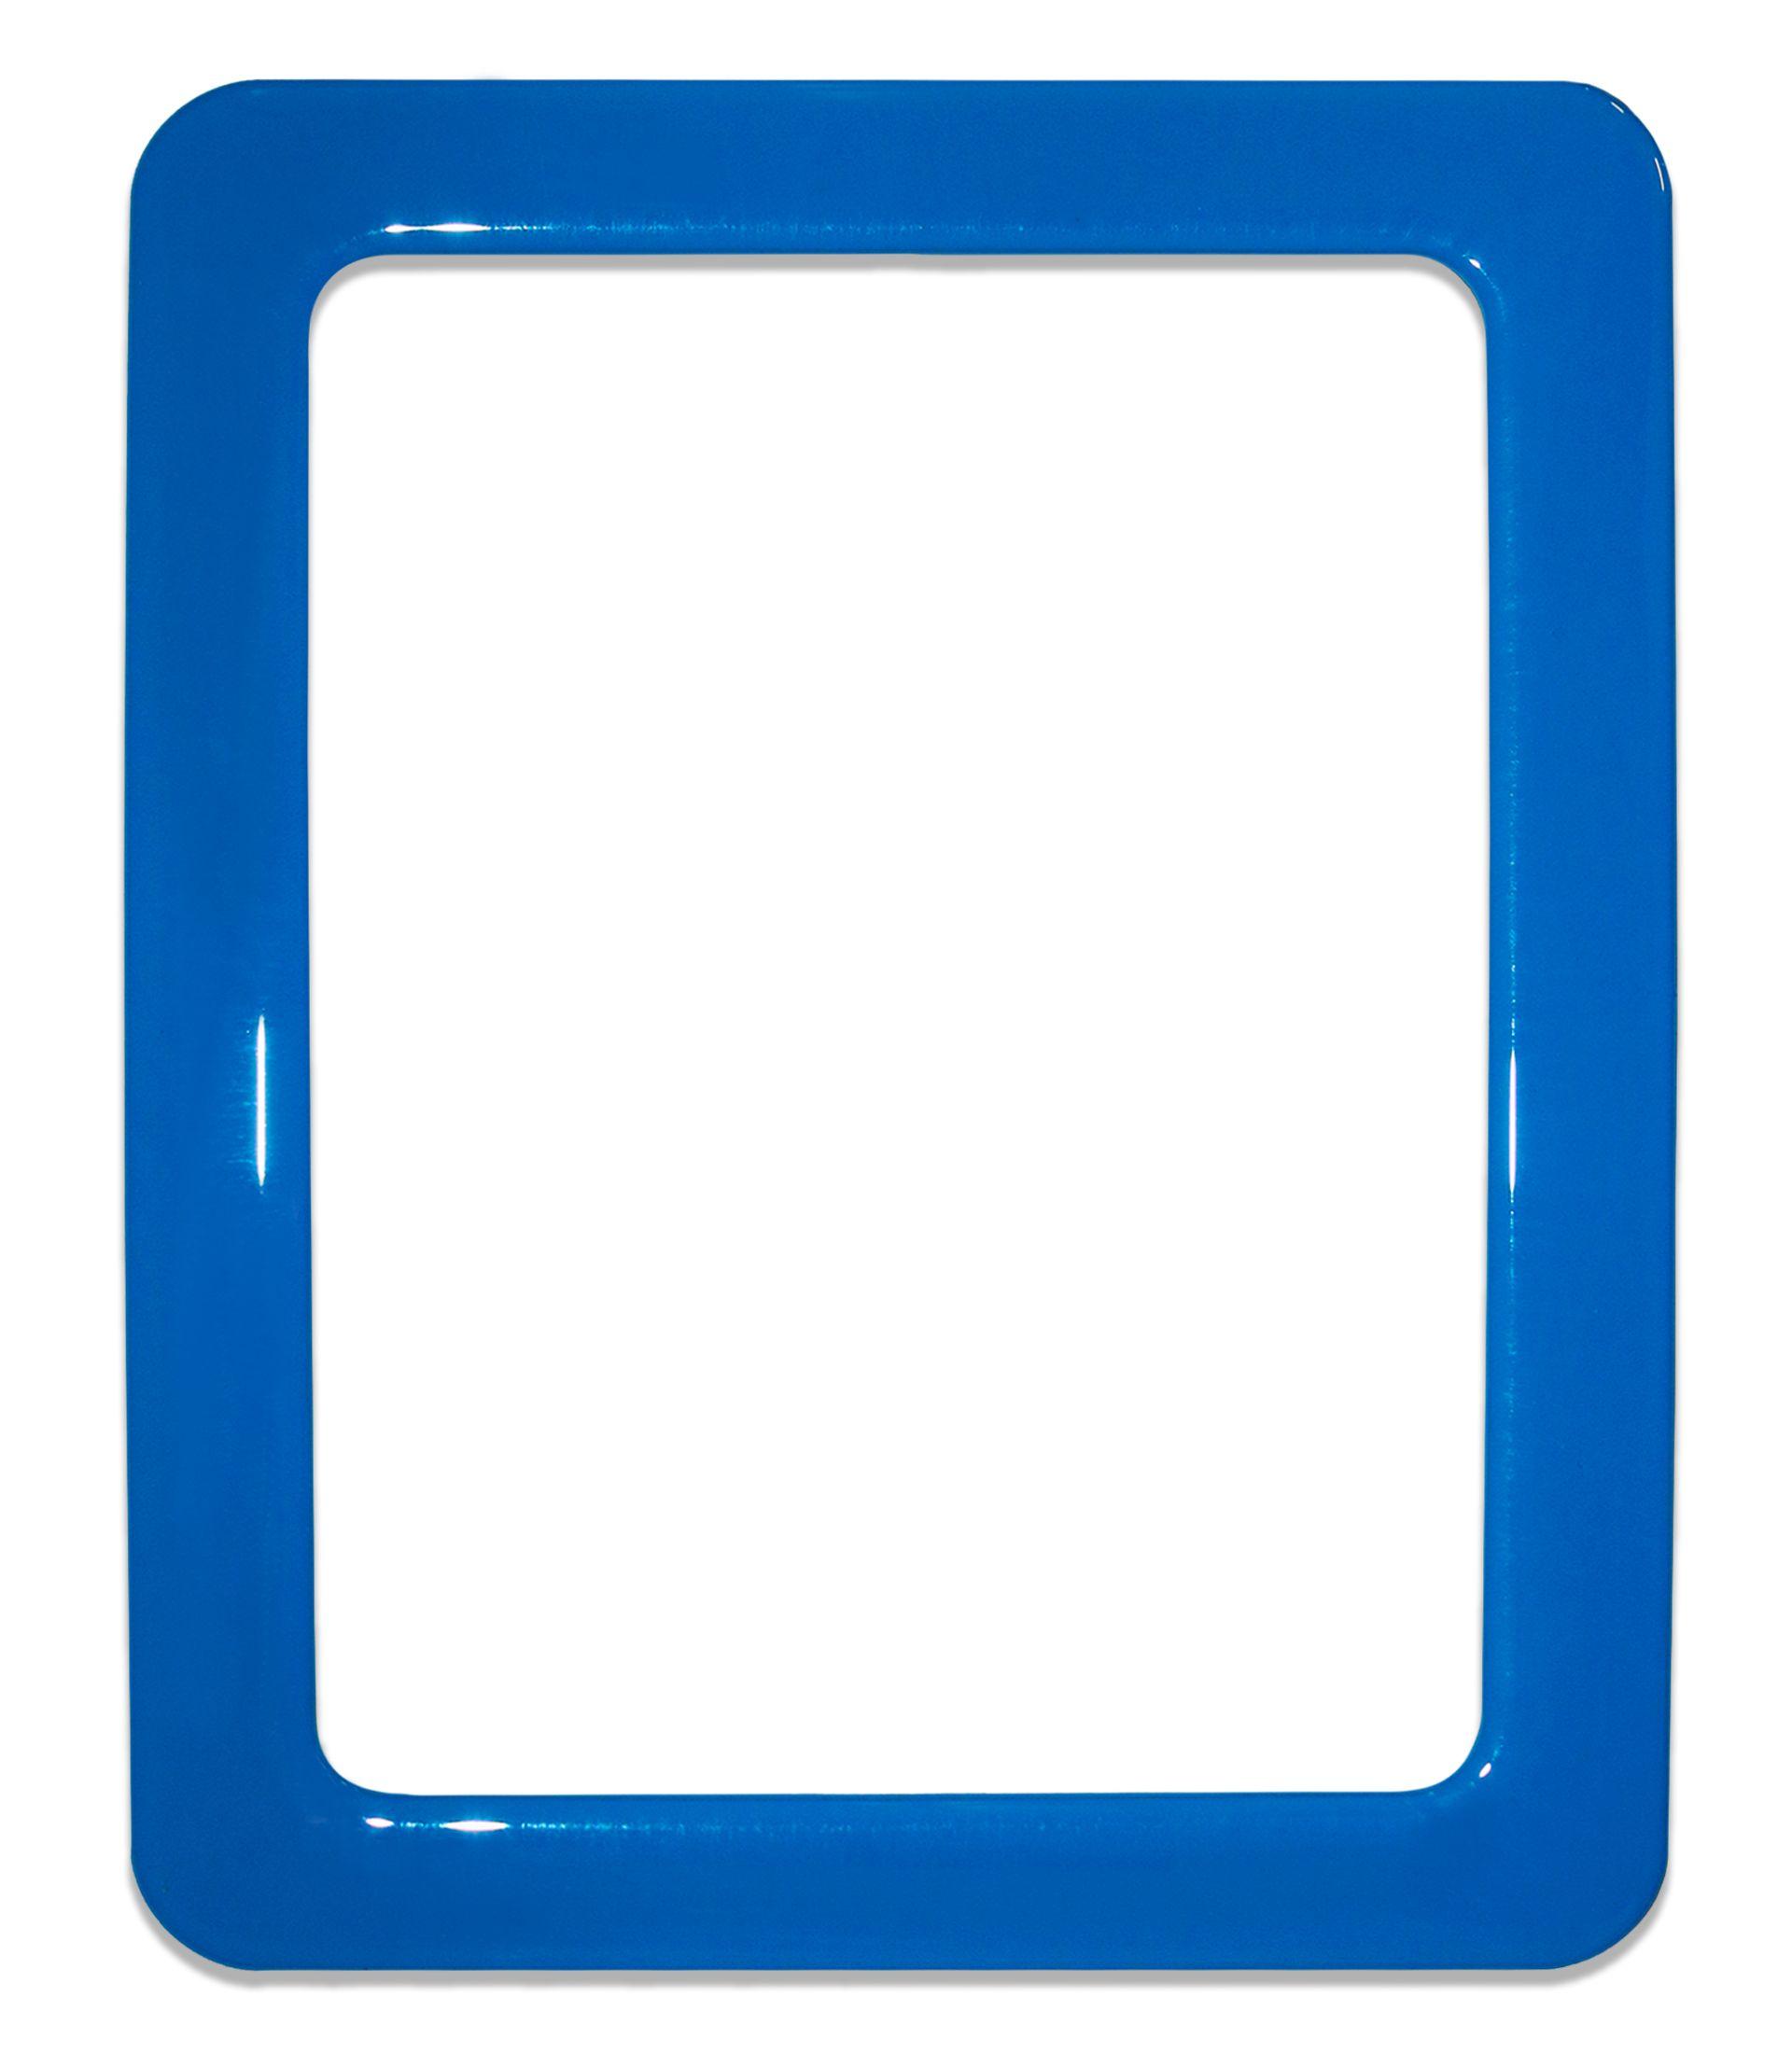 Magnetic self-adhesive frame size 19.0 x 23.8 cm - blue